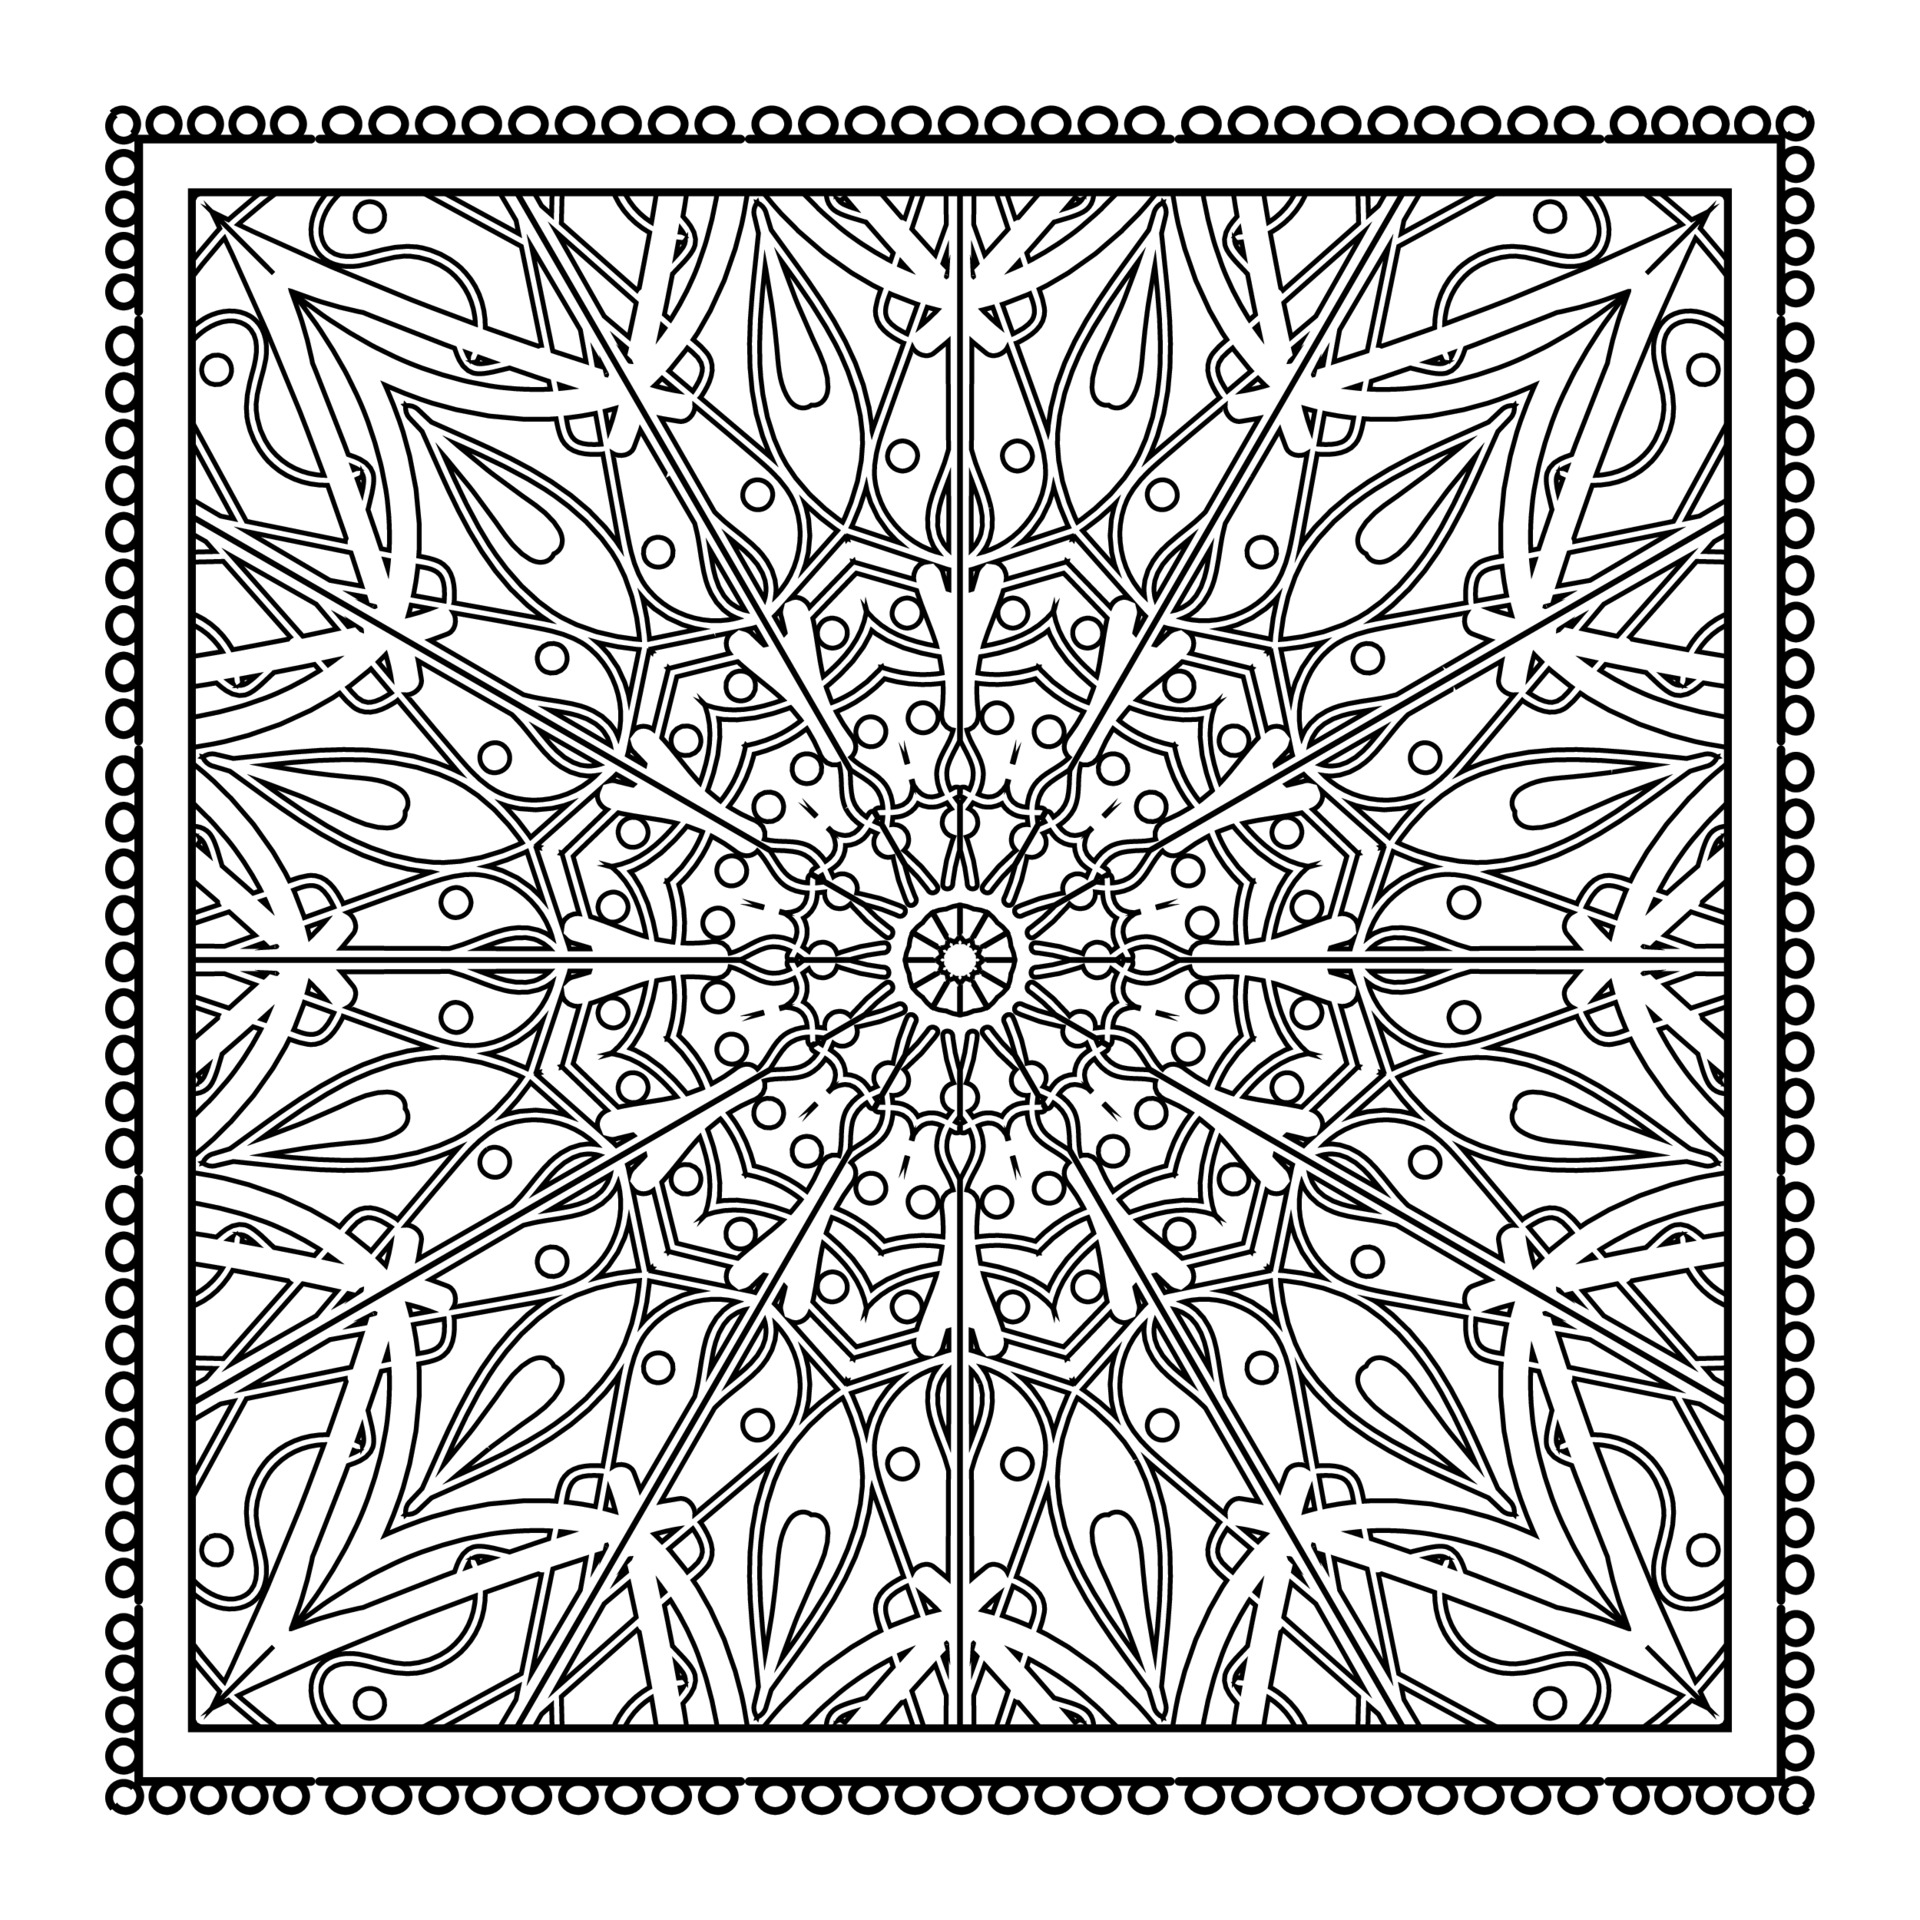 Outline square flower pattern in mehndi style for coloring book page ...